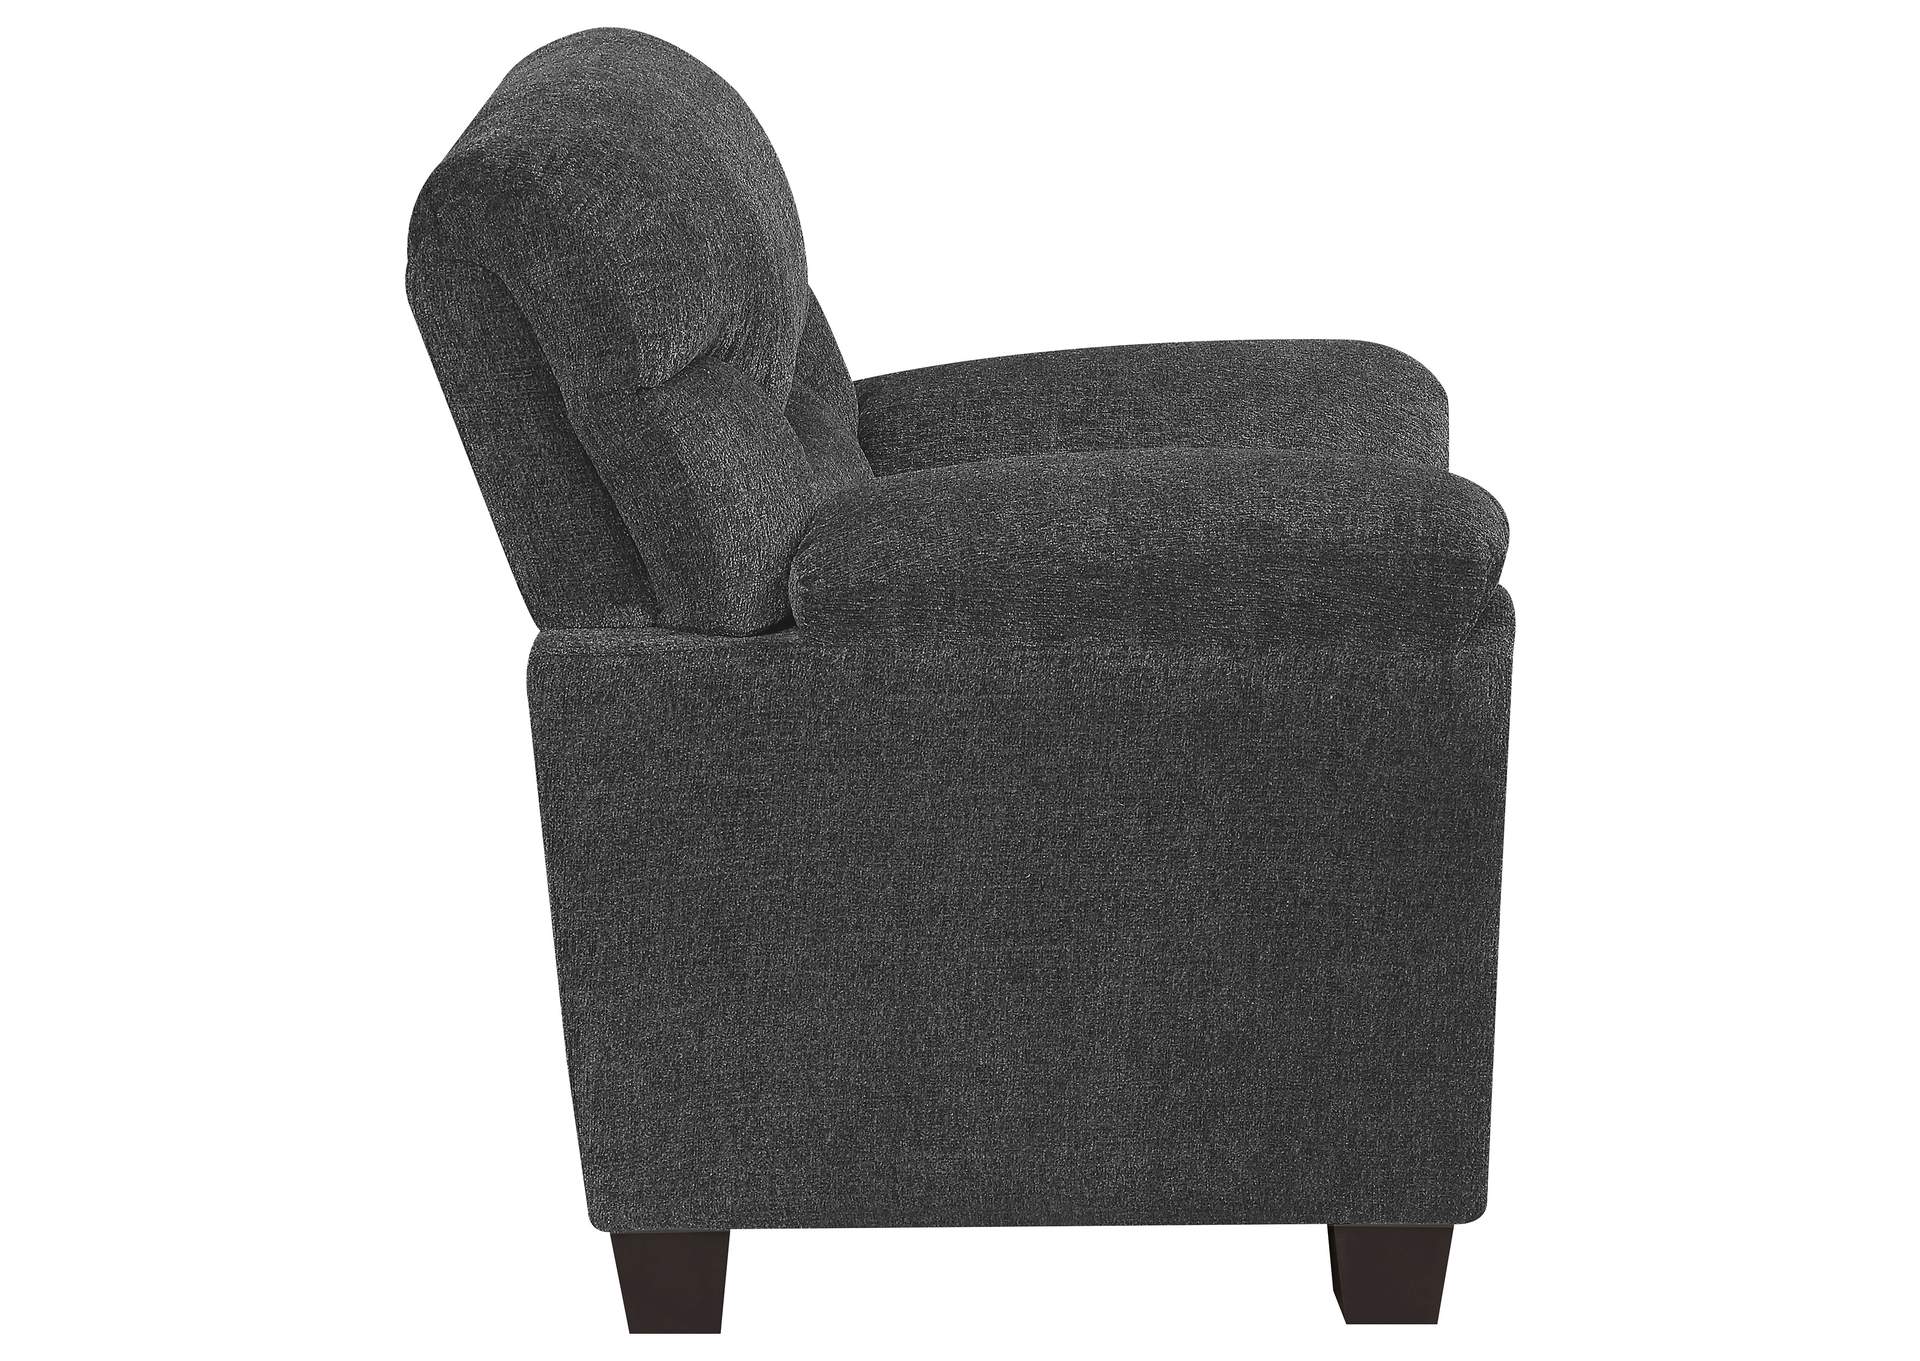 Clementine Upholstered Chair with Nailhead Trim Grey,Coaster Furniture